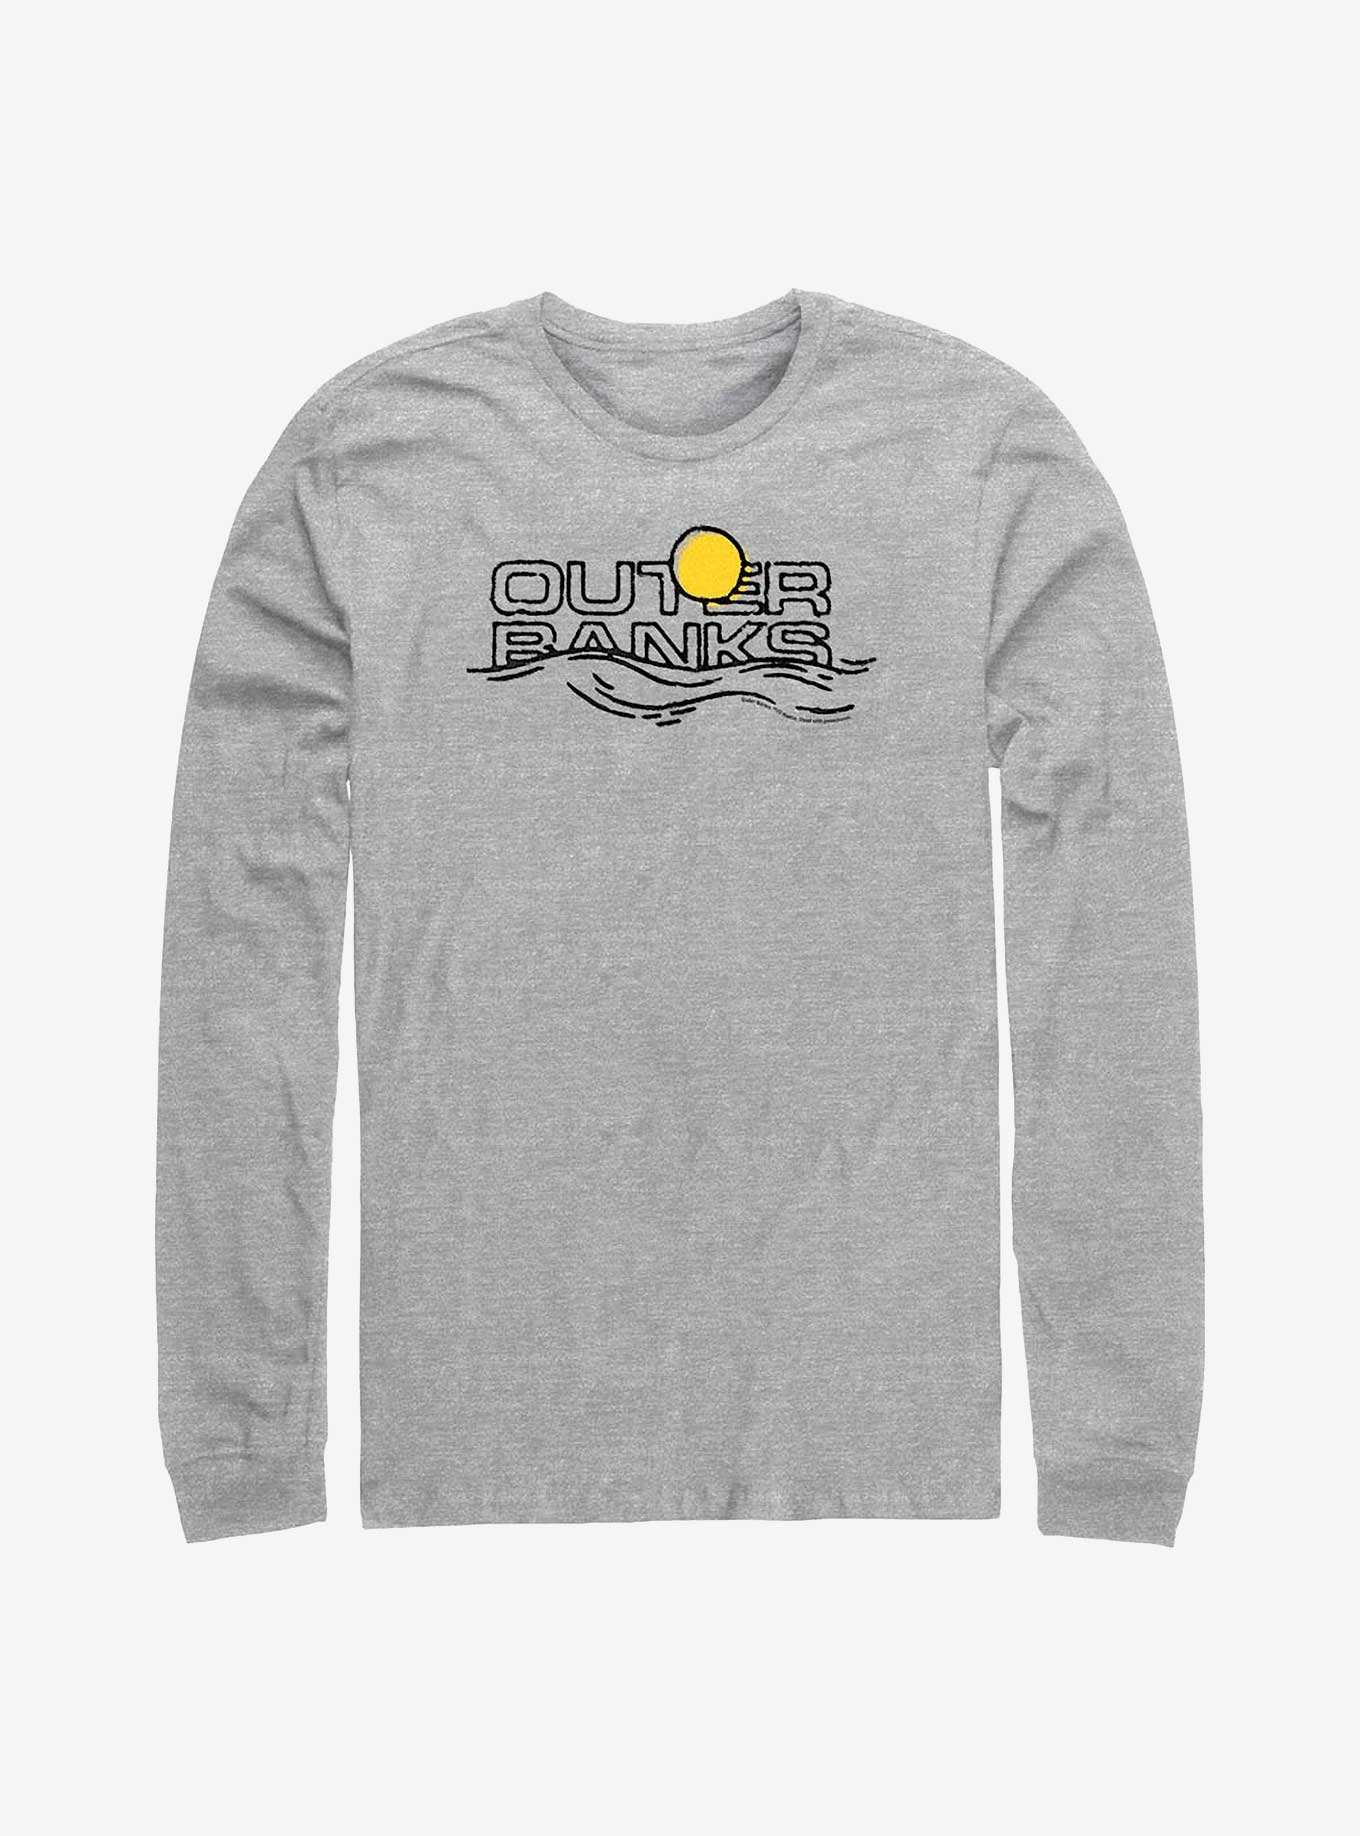 Outer Banks Title On Horizon Long-Sleeve T-Shirt, , hi-res